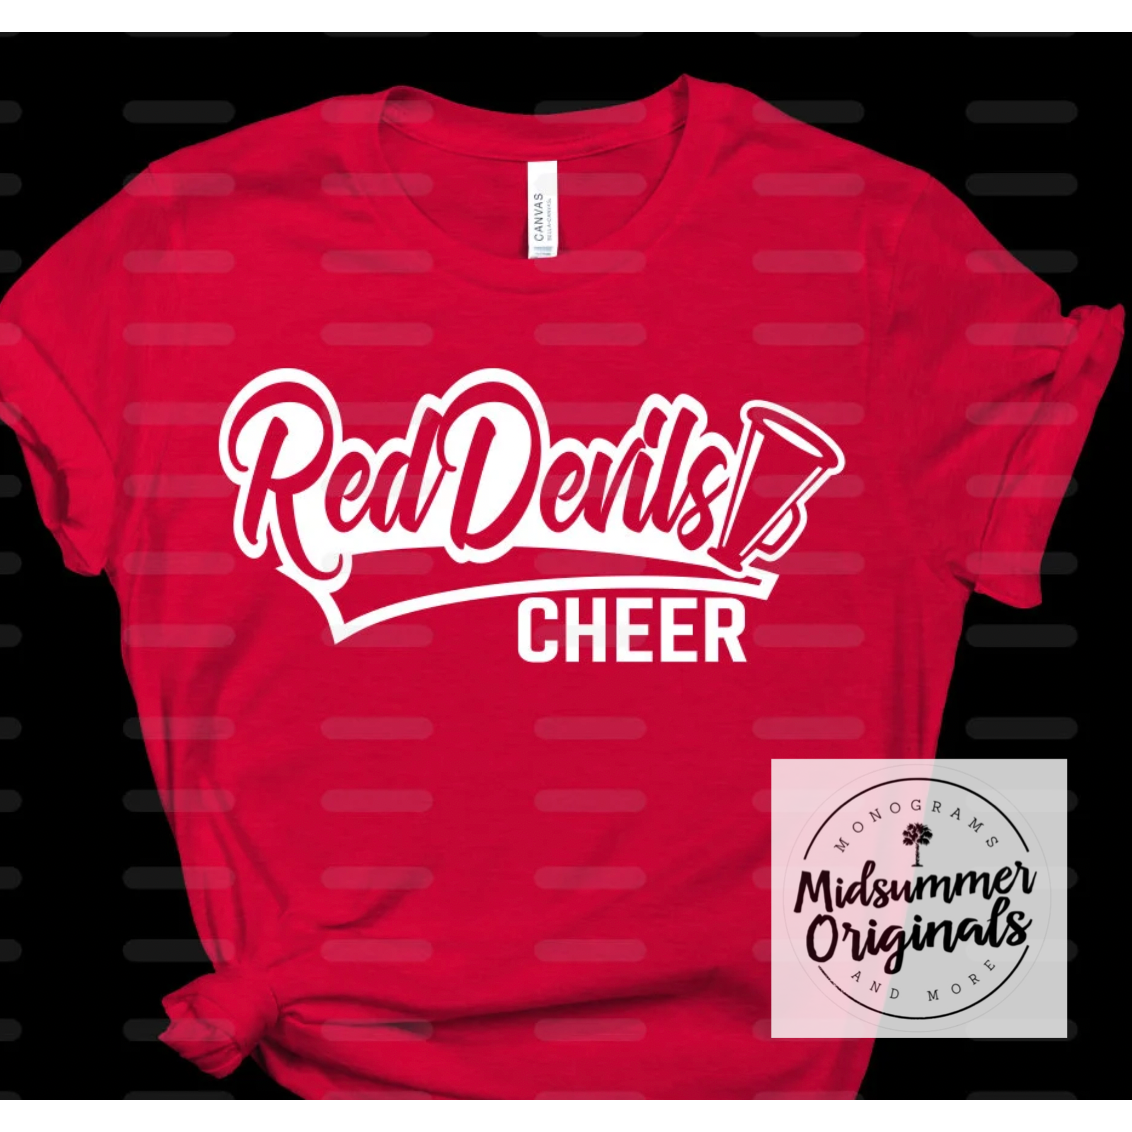 Red Devils Cheer